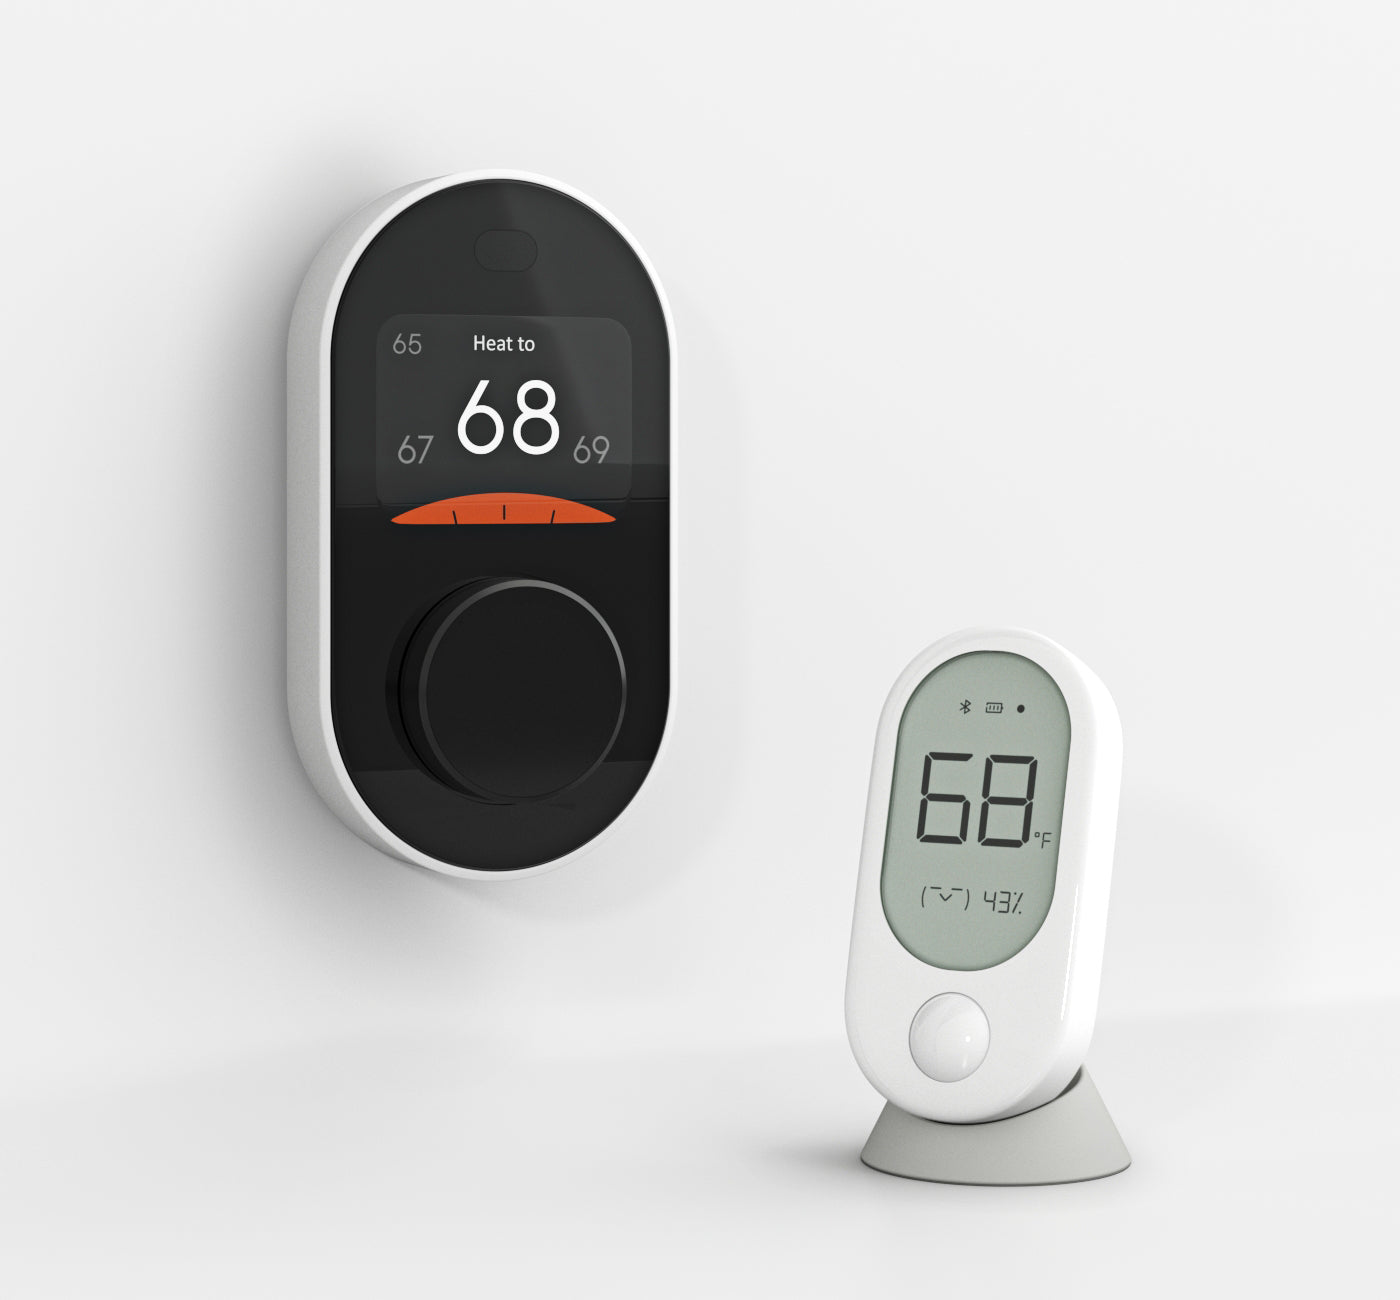 Wyze Thermostat and Wyze Room Sensor next to each other